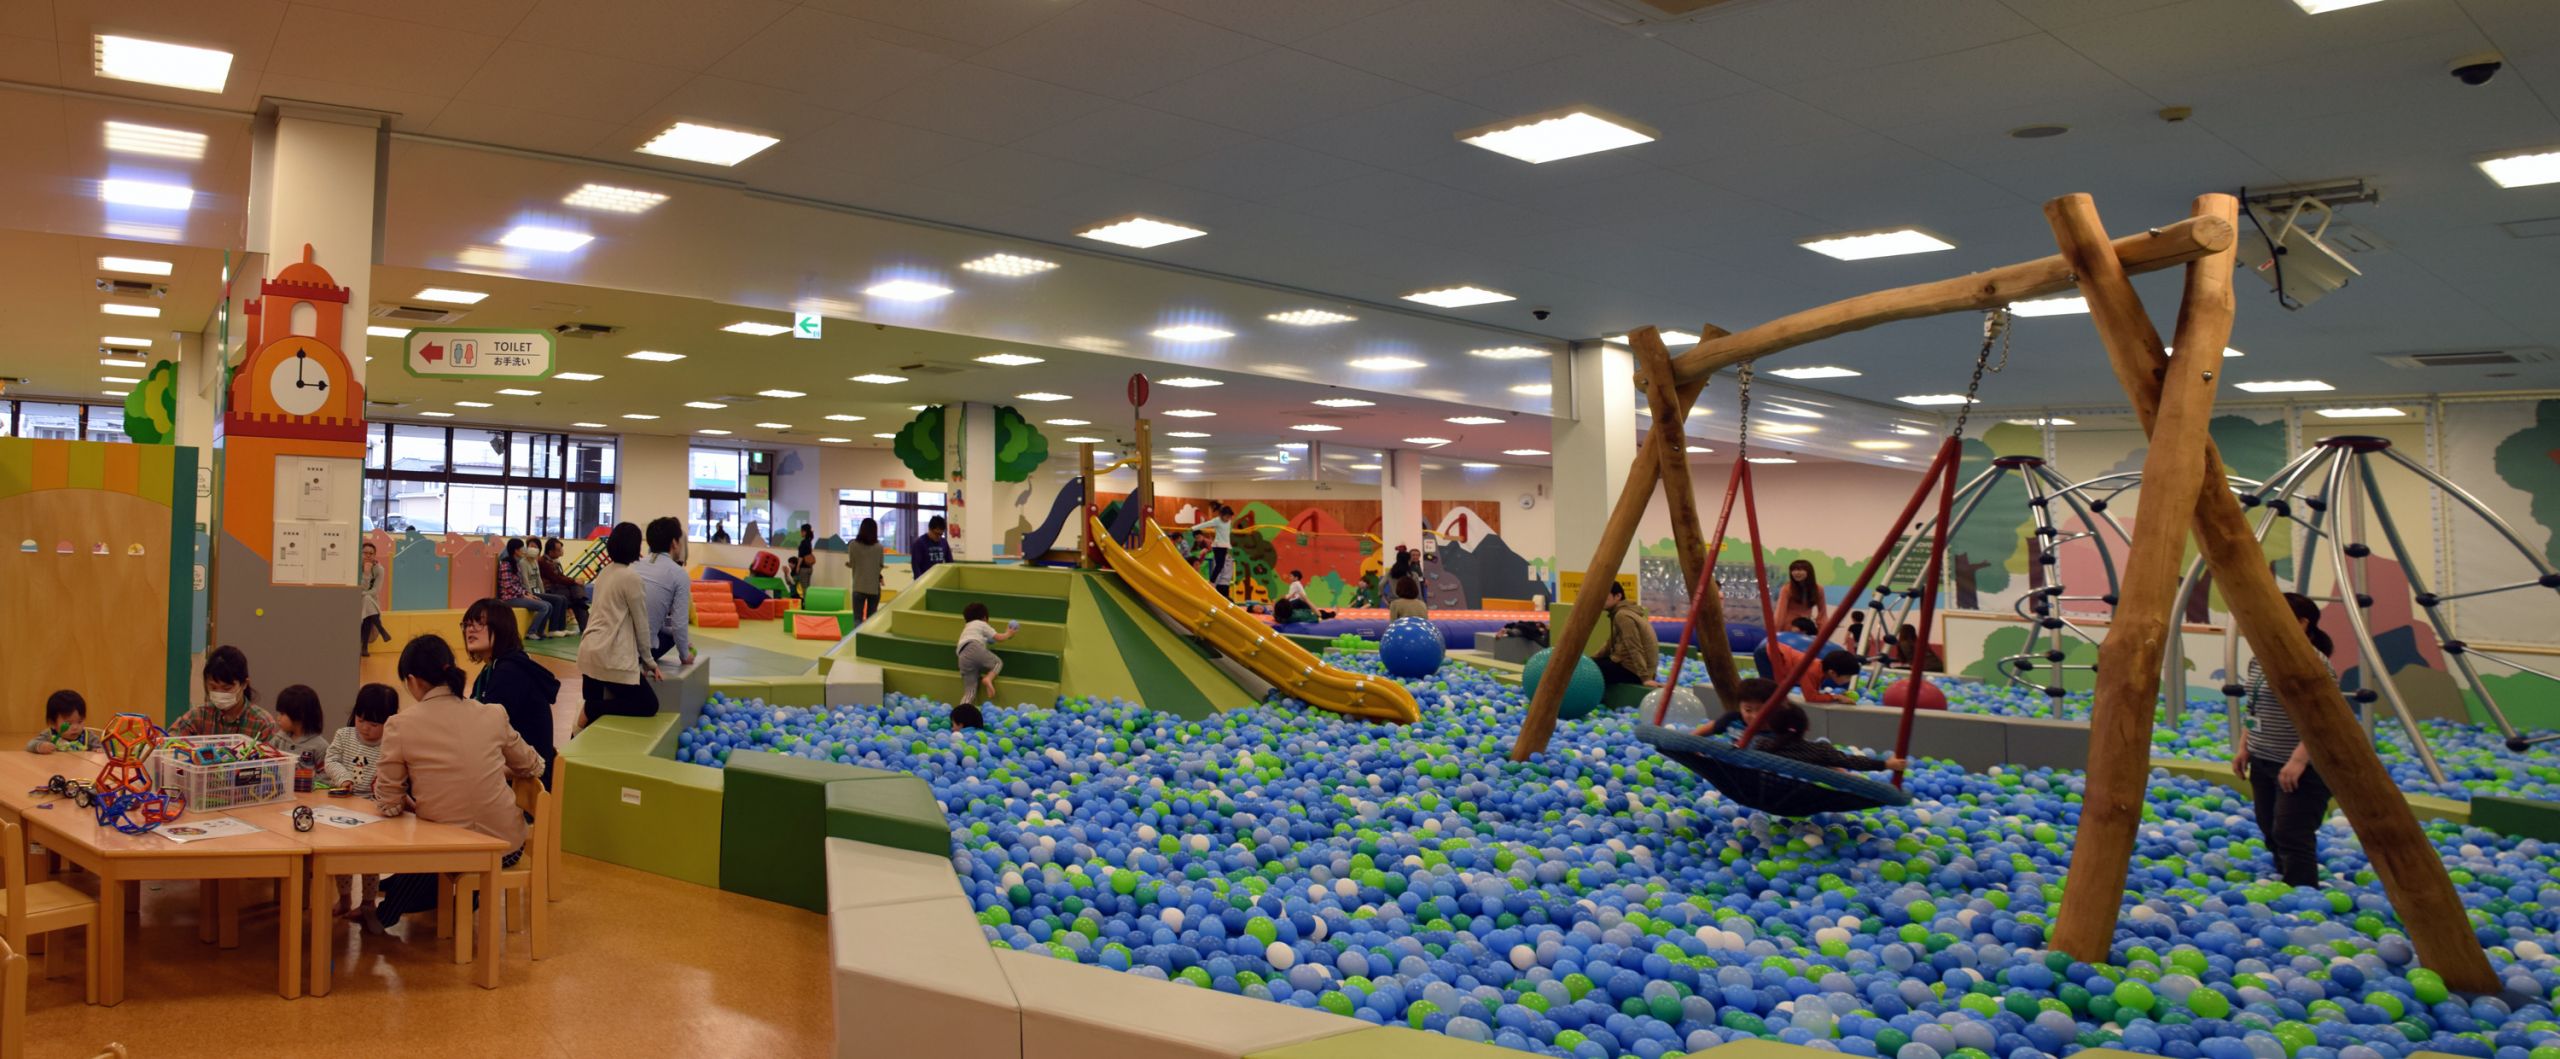 Kids Indoor Playground
 Fukushima Parents Find Relief From Radiation At Indoor